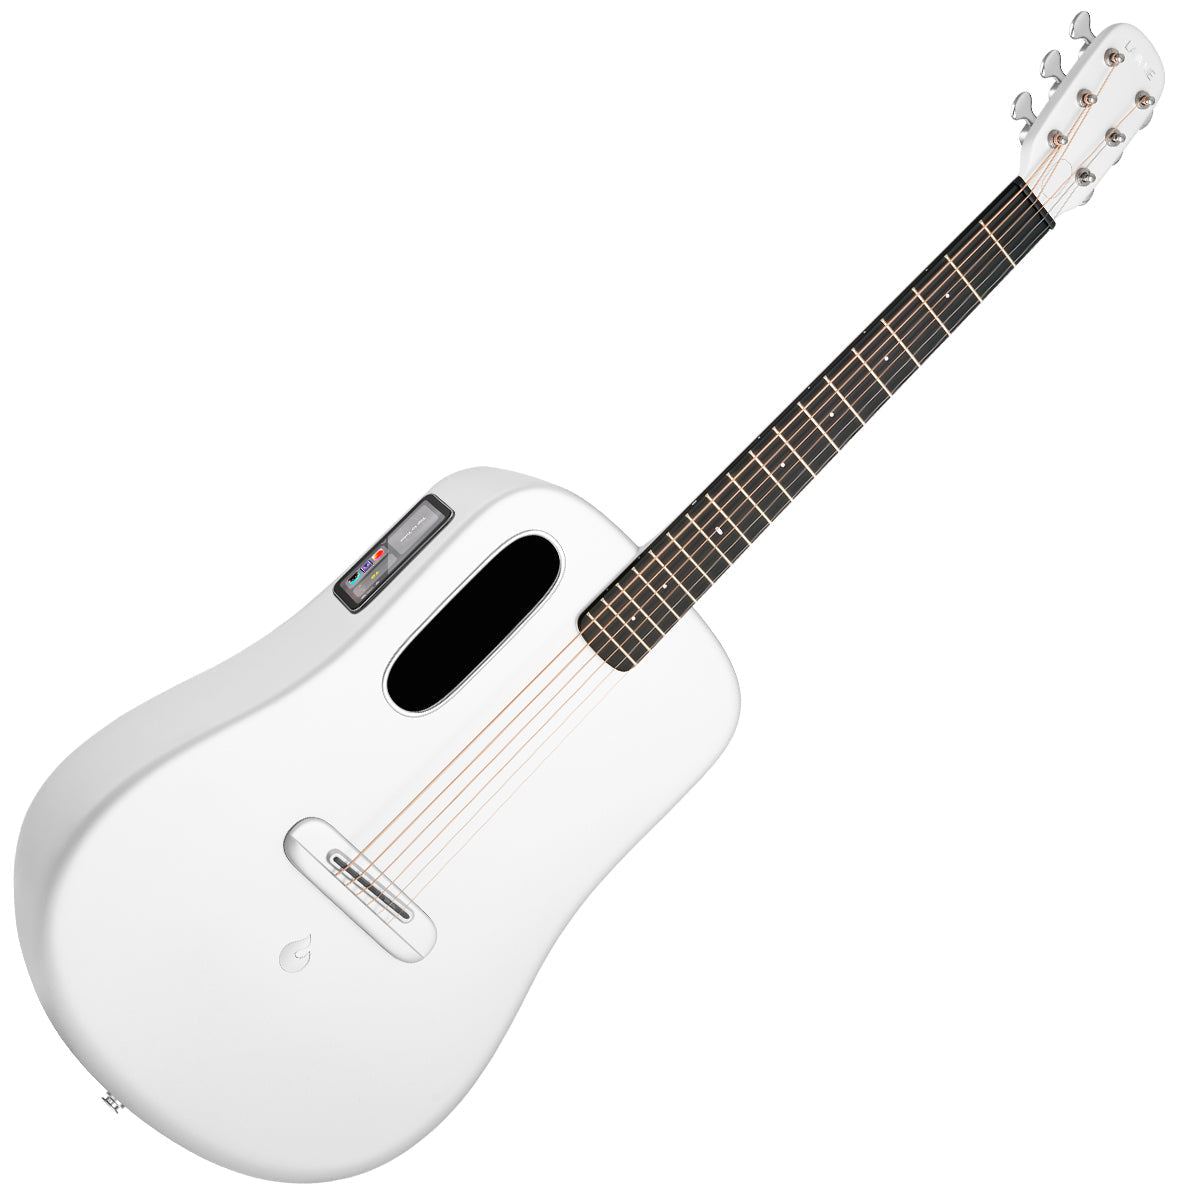 LAVA ME4 Carbon 36" with AirFlow Bag ~ White, Acoustic Guitar for sale at Richards Guitars.